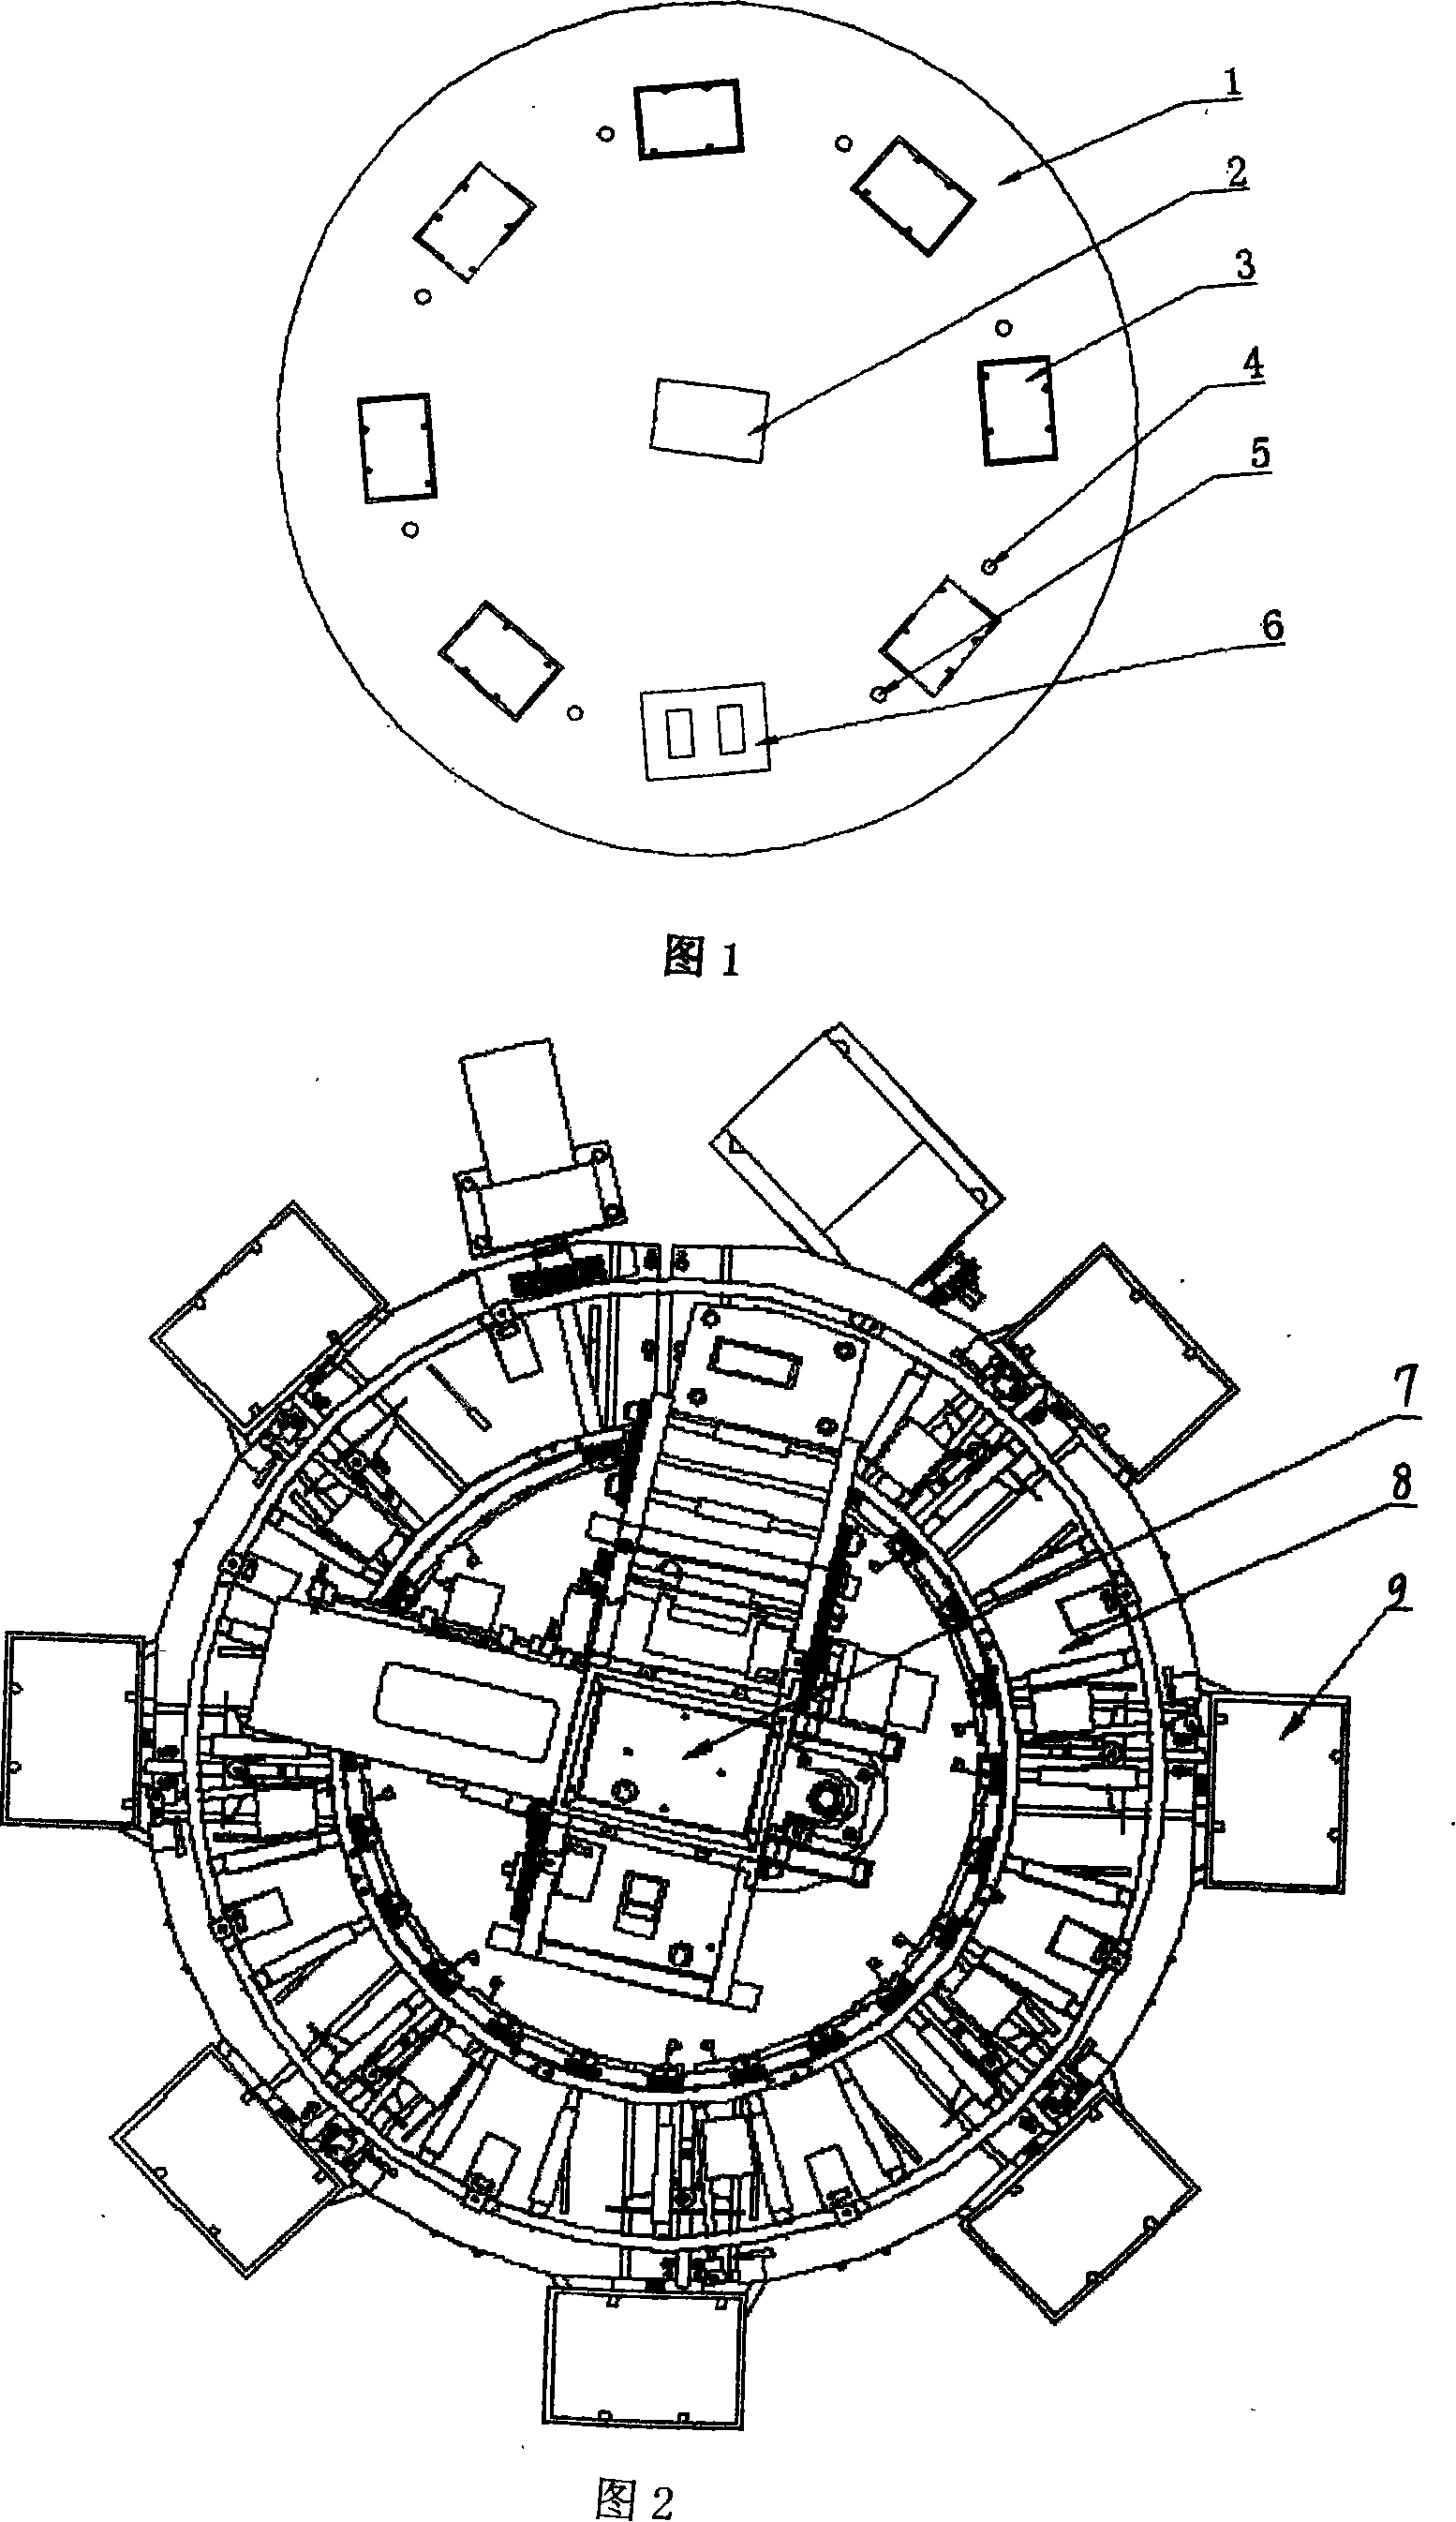 Multifunctional electromechanical device for riffling and dealing playing cards automatically